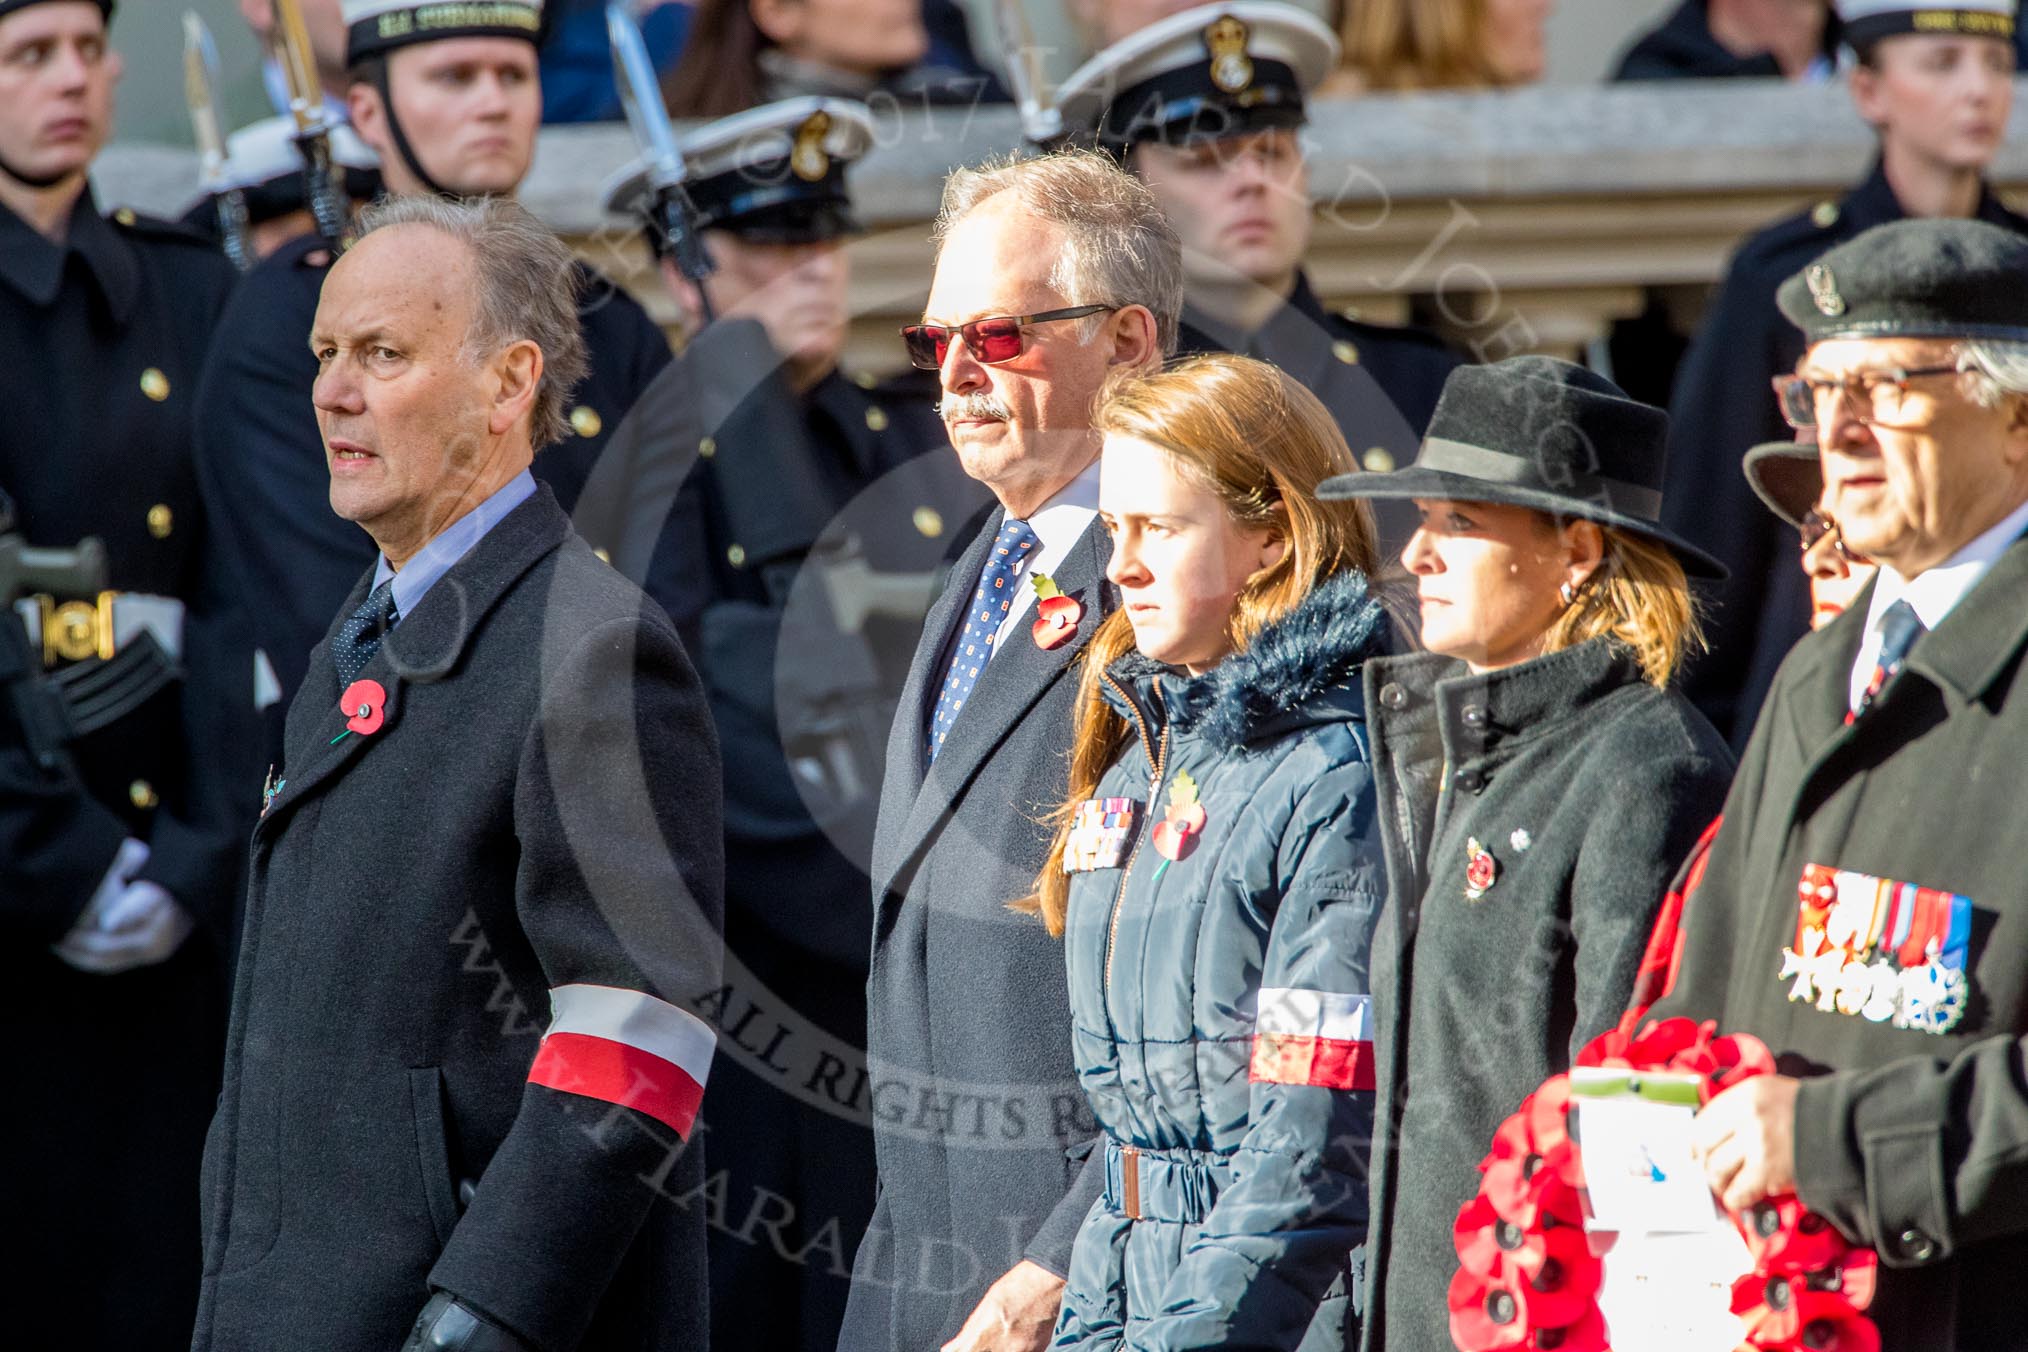 Stowarzyszenie Przyjaciol Polskich Weteranow -SPPW (Group D20, 30 members) during the Royal British Legion March Past on Remembrance Sunday at the Cenotaph, Whitehall, Westminster, London, 11 November 2018, 12:24.